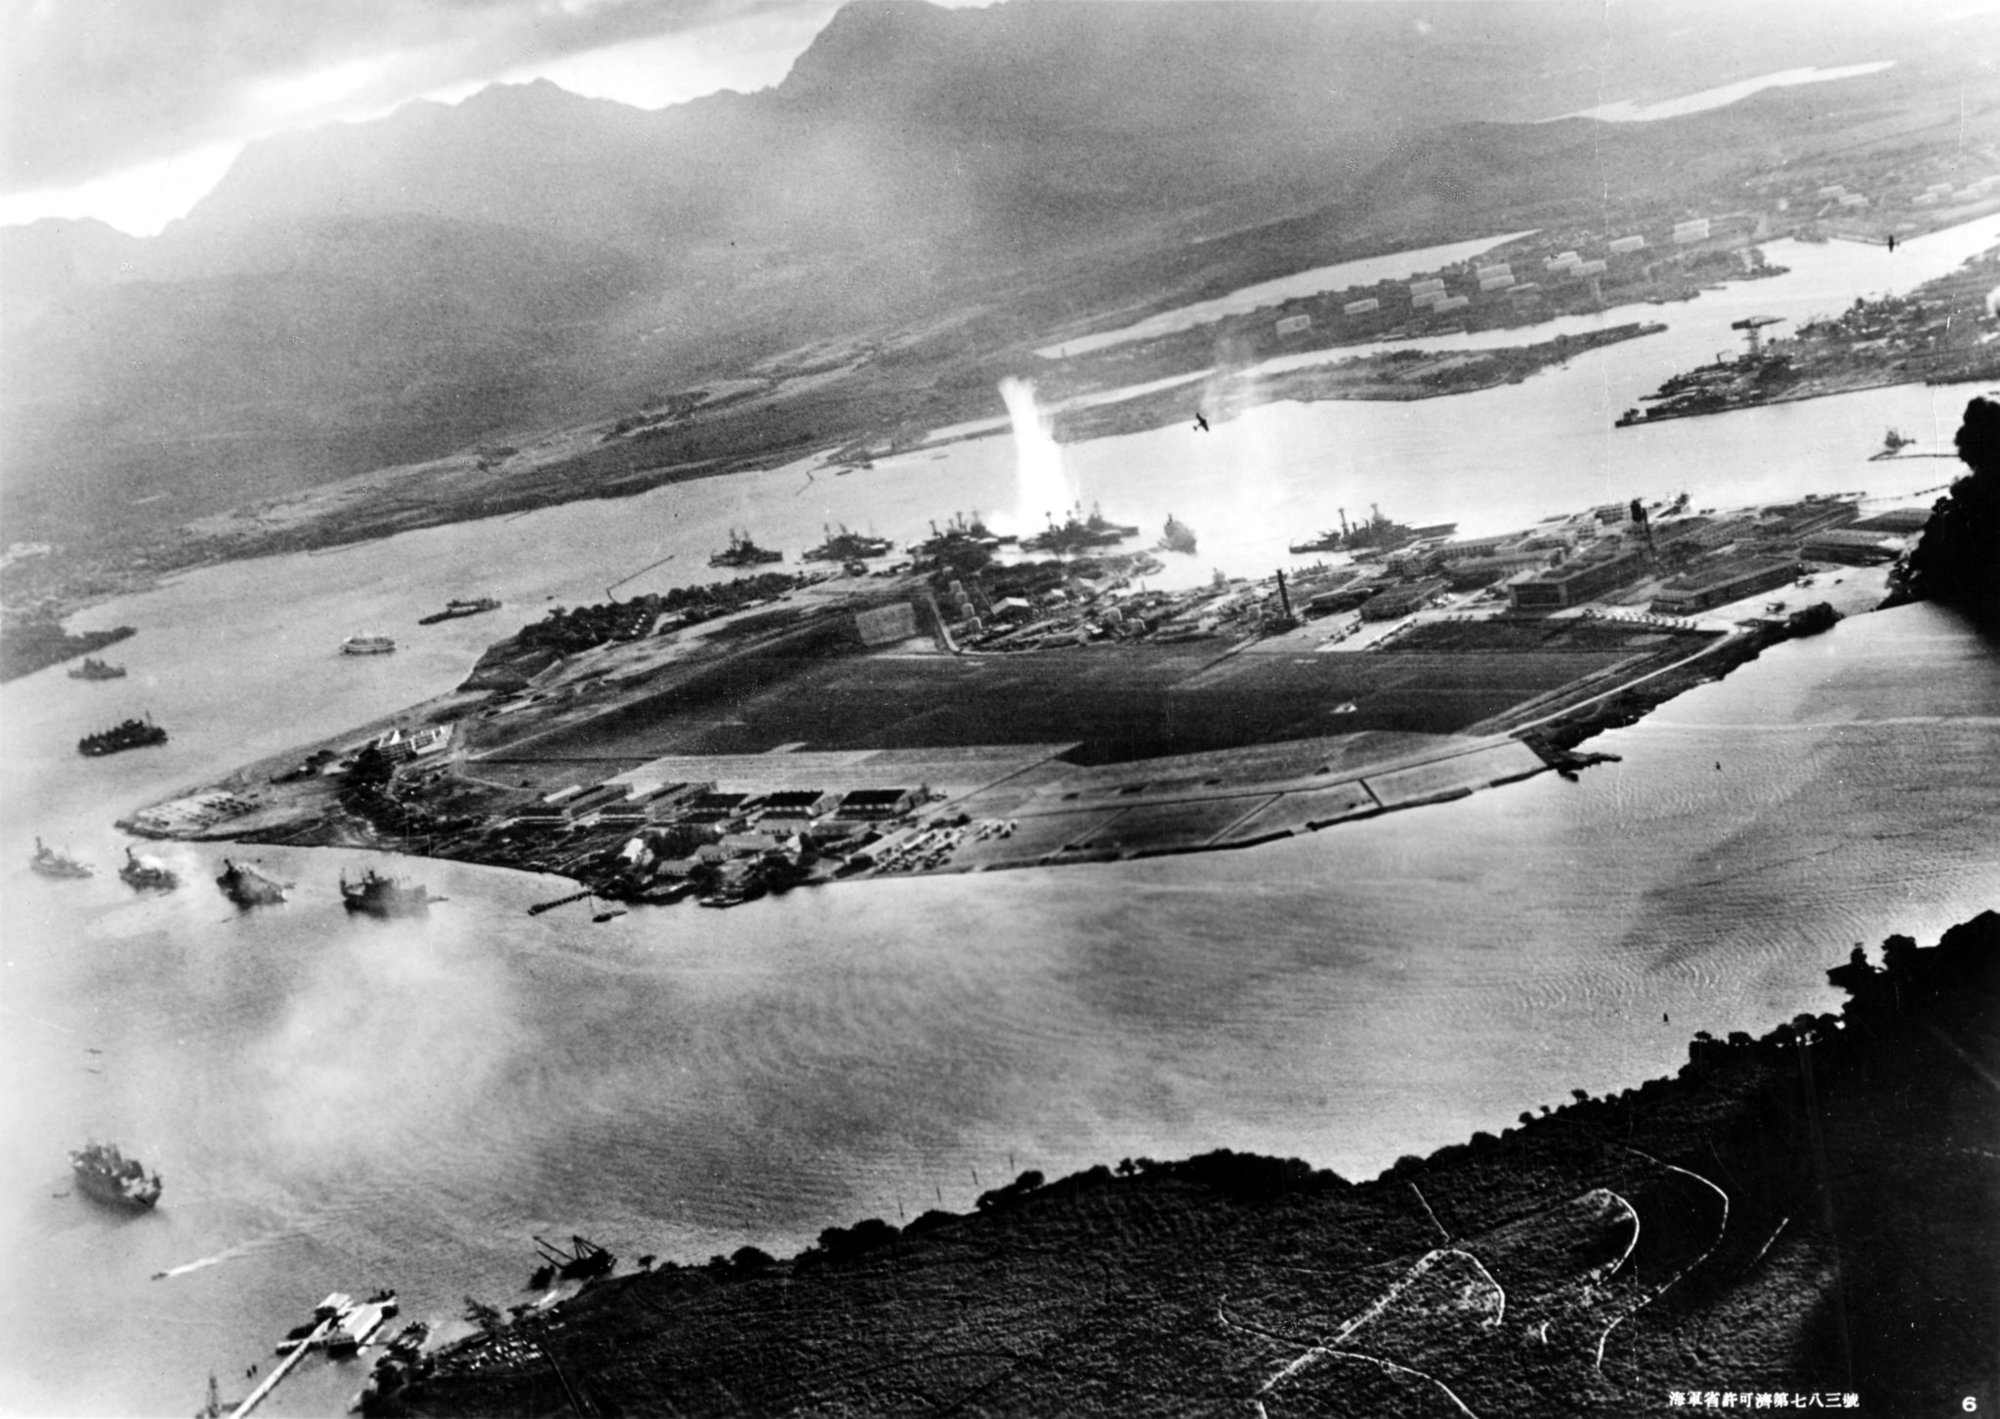 Photograph taken from a Japanese plane during the torpedo attack on ships moored on both sides of Ford Island. View looks about east, with the supply depot, submarine base and fuel tank farm in the right center distance. A torpedo has just hit USS West Virginia on the far side of Ford Island (center). Other battleships moored nearby are (from left): Nevada, Arizona, Tennessee (inboard of West Virginia), Oklahoma (torpedoed and listing) alongside Maryland, and California. On the near side of Ford Island, to the left, are light cruisers Detroit and Raleigh, target and training ship Utah and seaplane tender Tangier. Raleigh and Utah have been torpedoed, and Utah is listing sharply to port. Japanese planes are visible in the right center (over Ford Island) and over the Navy Yard at right. Japanese writing in the lower right states that the photograph was reproduced by authorization of the Navy Ministry.  U.S. Naval History and Heritage Command Photograph.